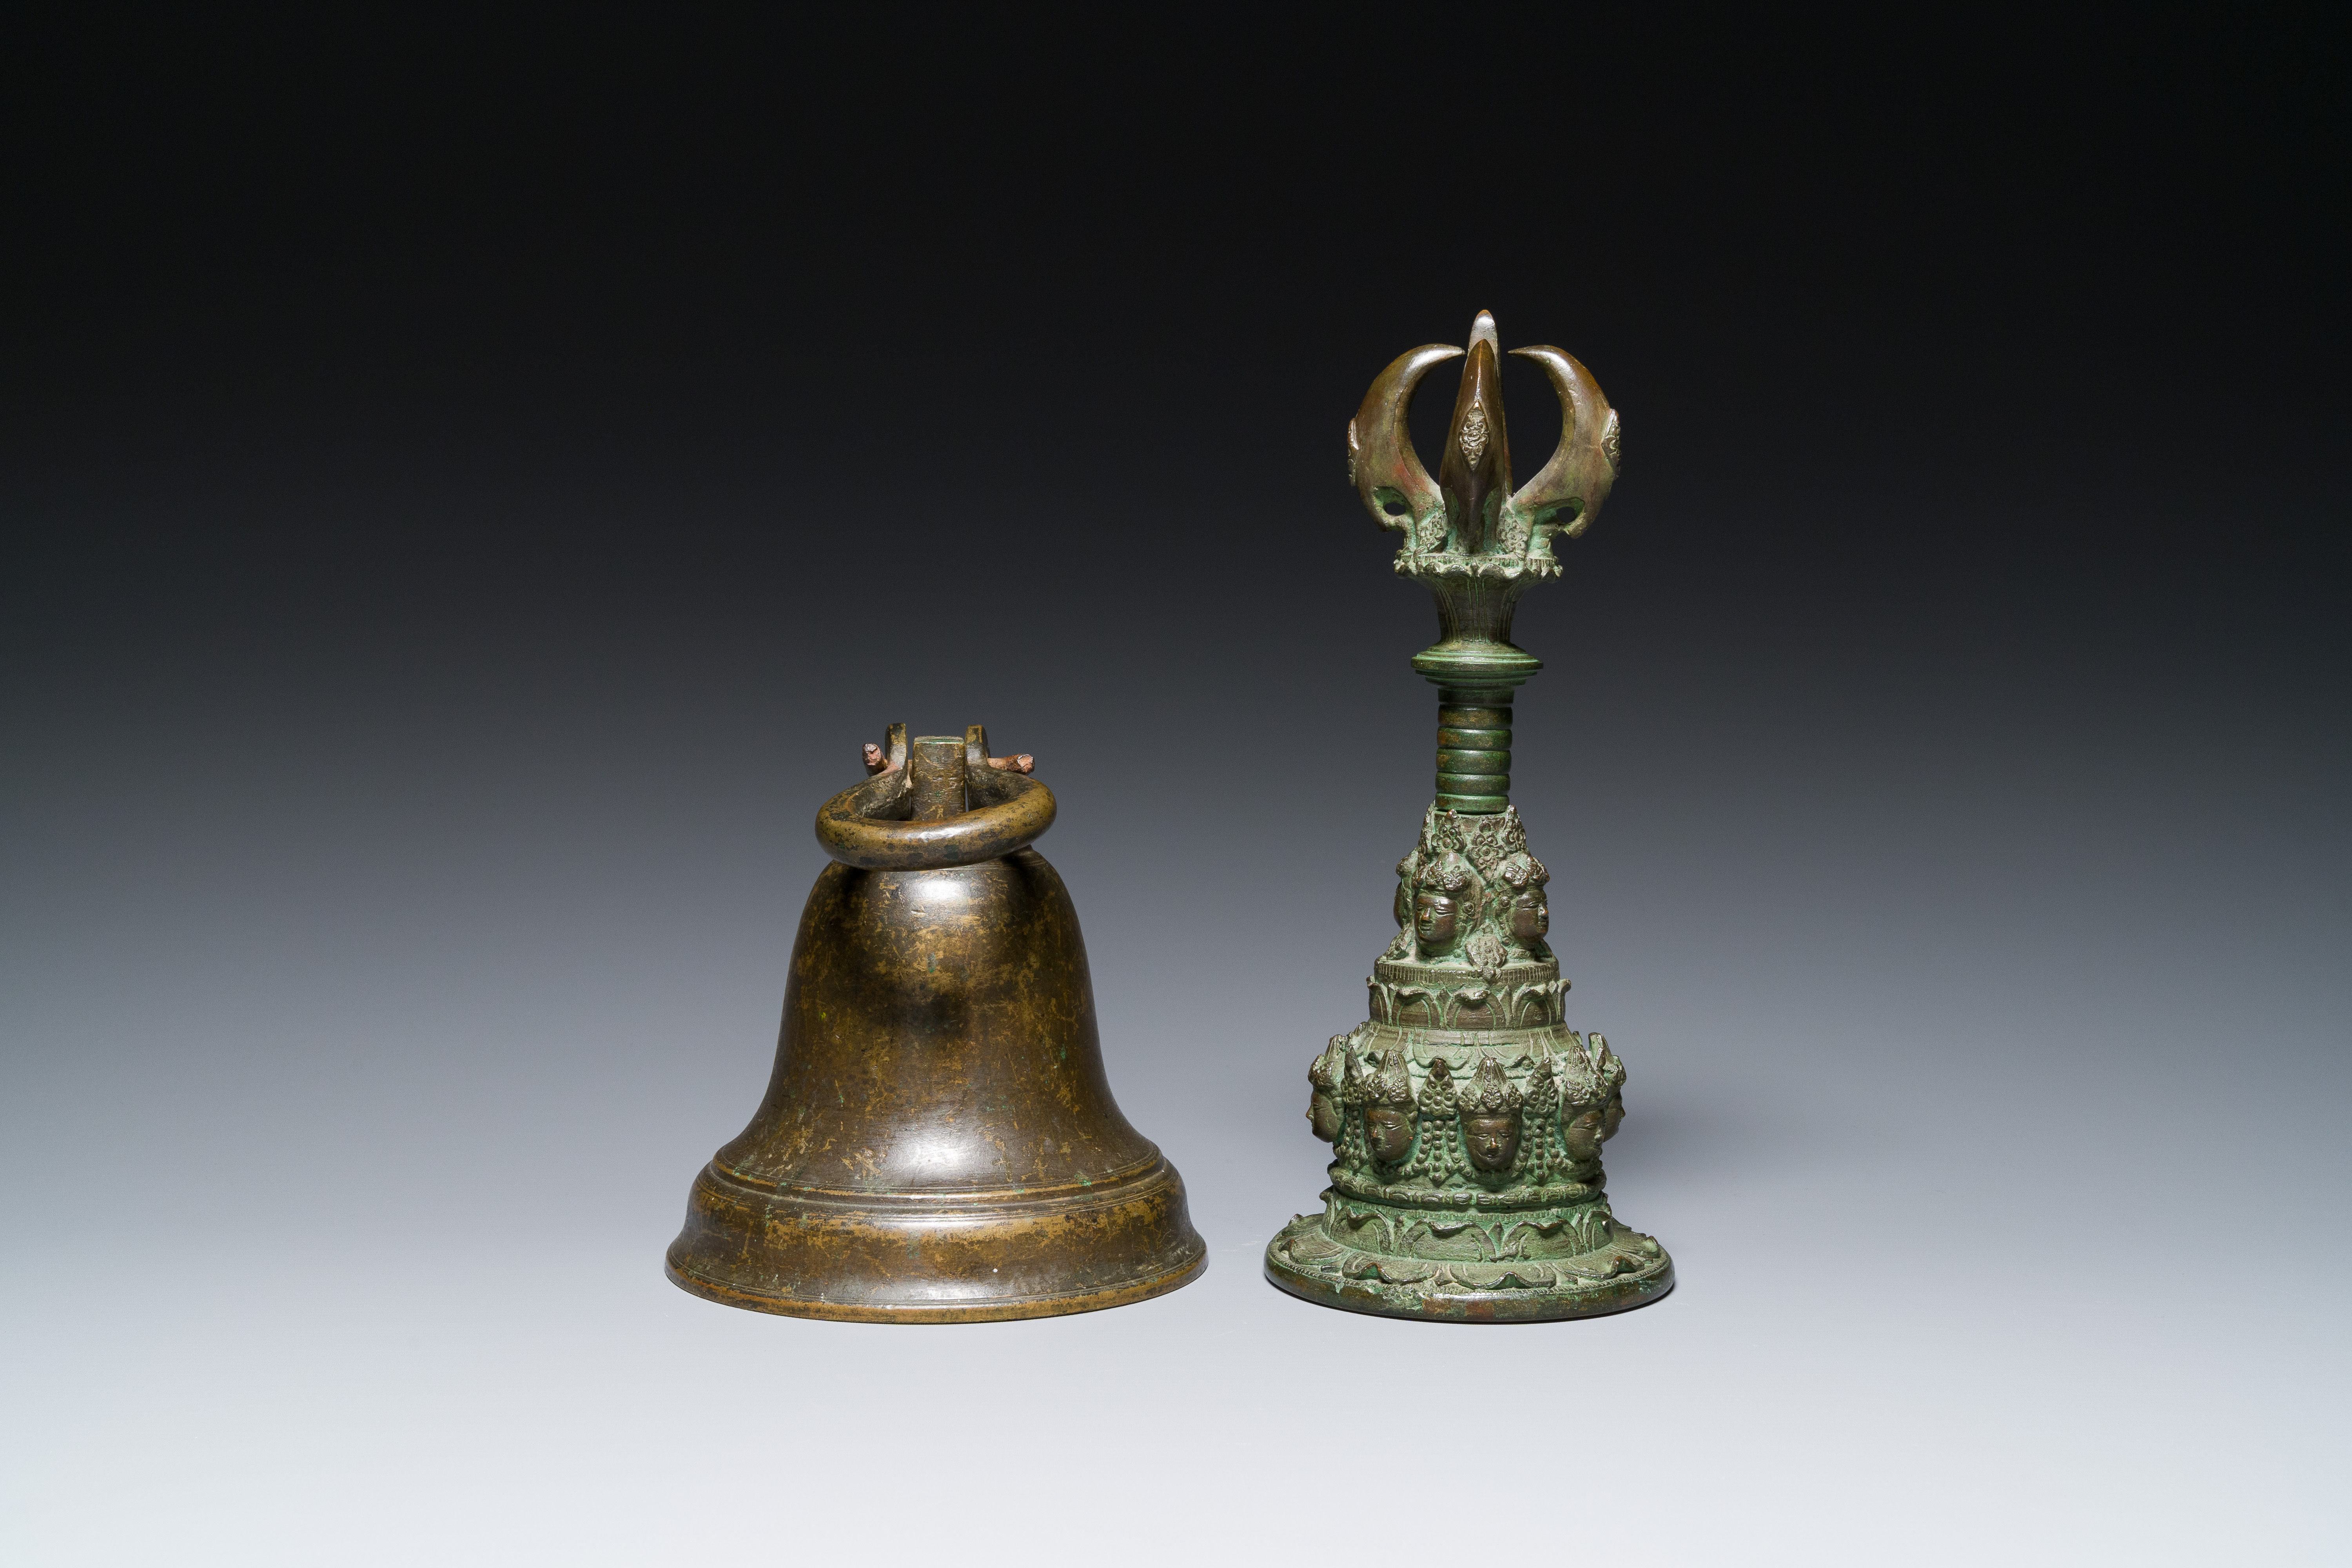 A bronze bell and a ceremonial hand bell, South Asia and Southeast Asia, 19th C. or earlier - Image 10 of 21